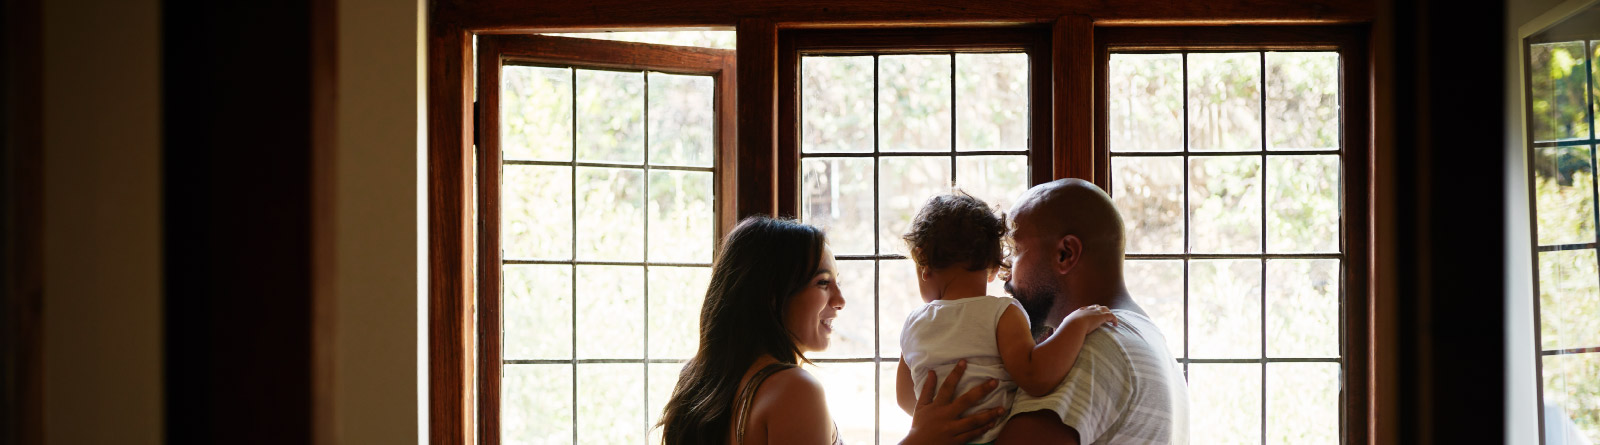 Young family of three looking out the window